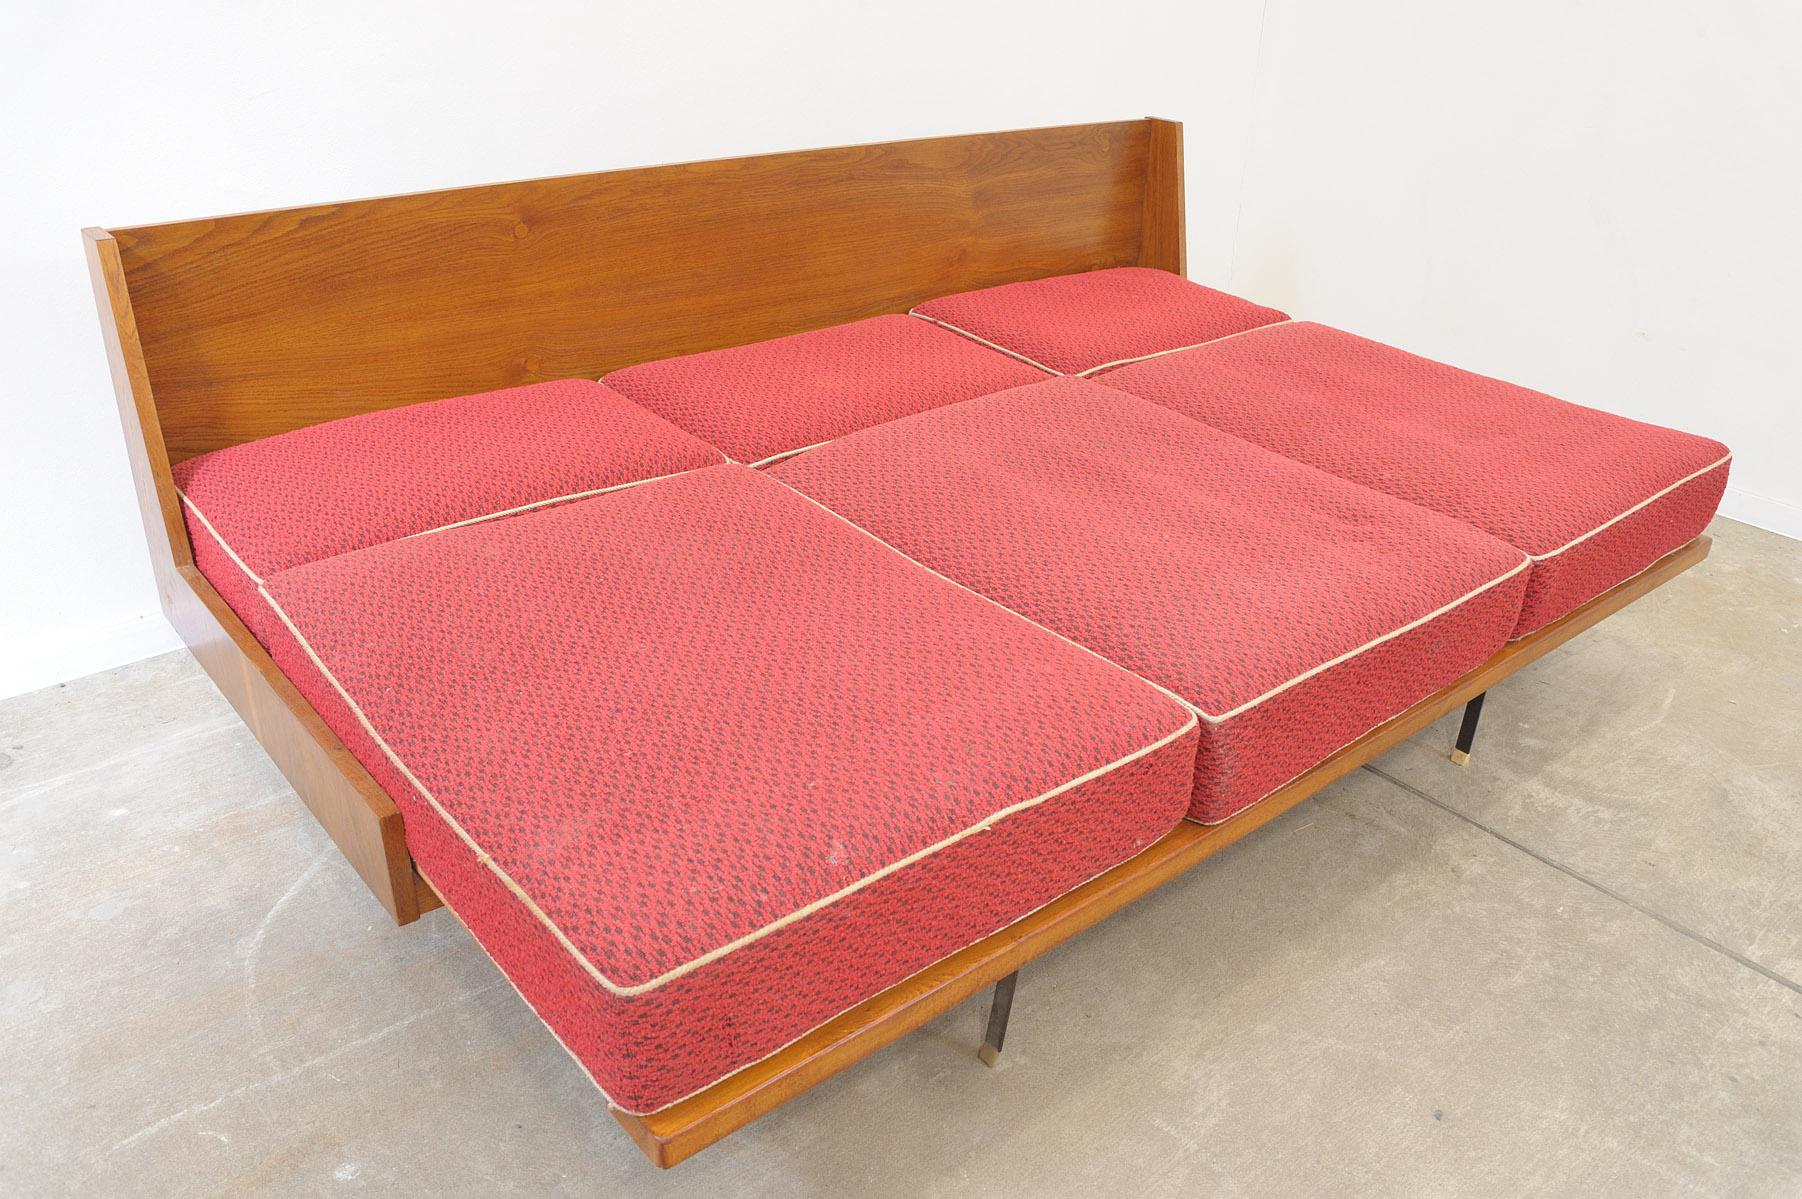 20th Century Midcentury Folding Sofabed by Drevotvar, 1970s, Czechoslovakia For Sale